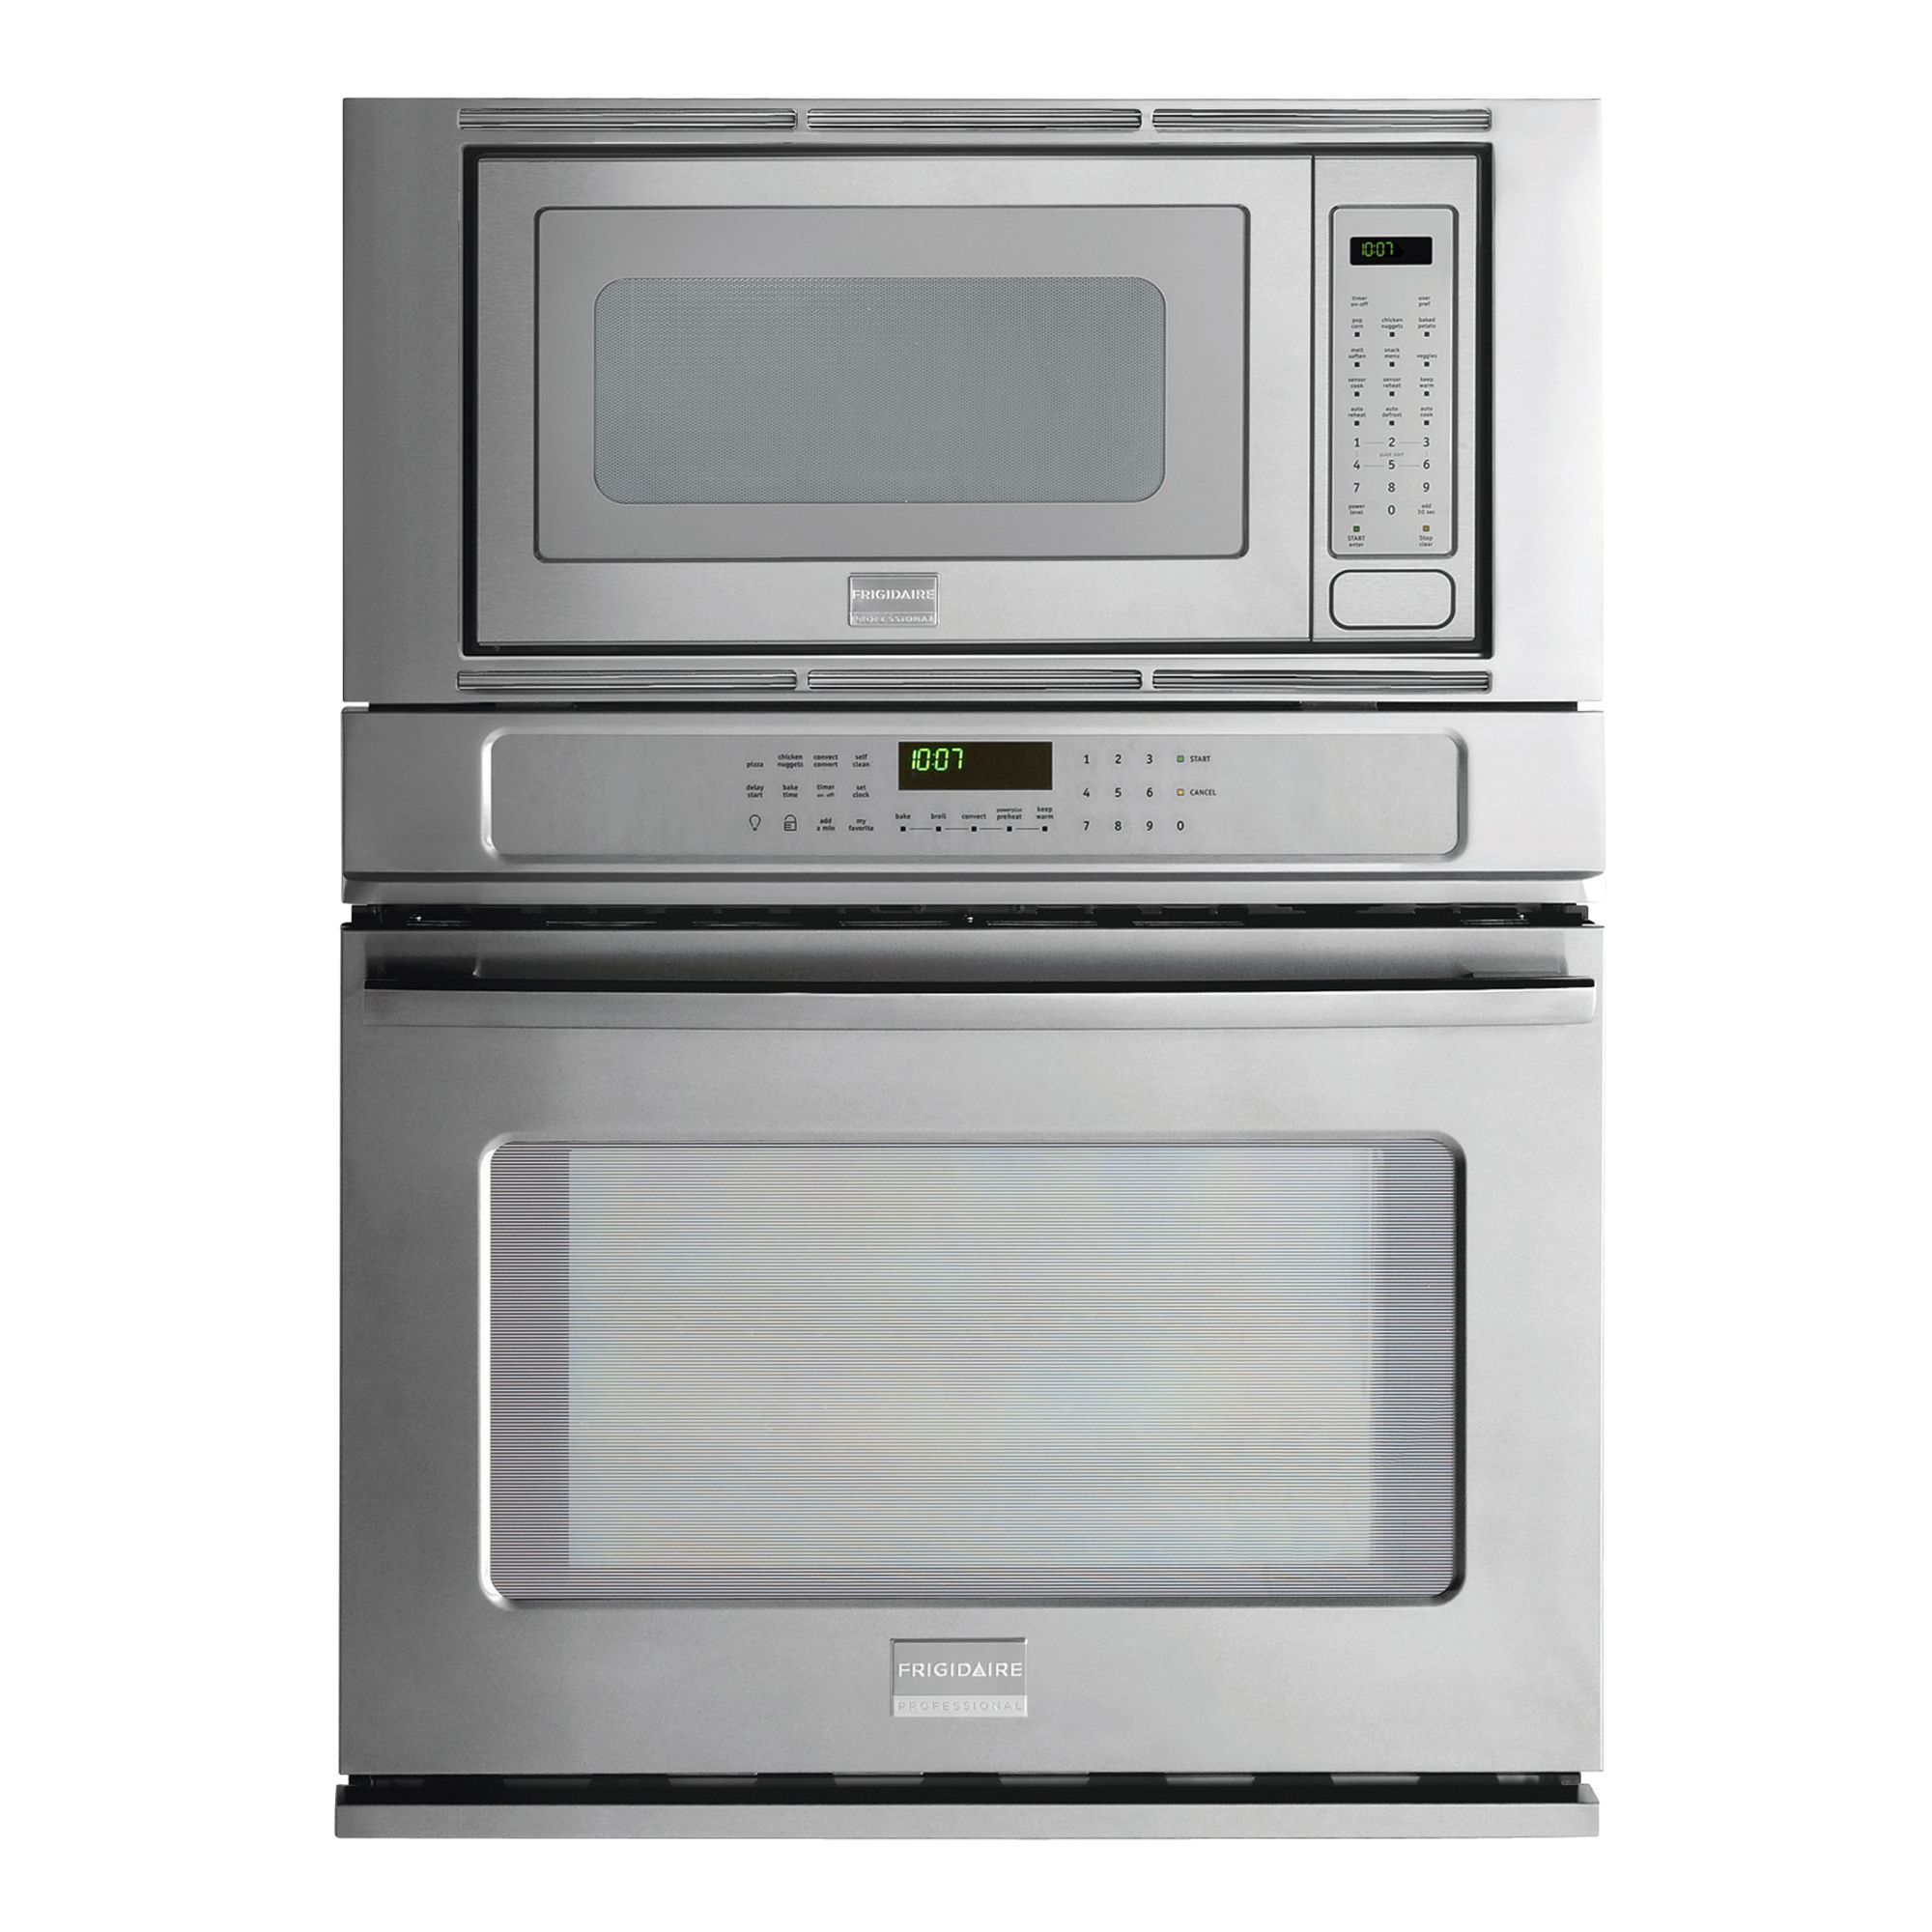 Frigidaire FPMC3085KF 30" Convection Wall Oven w/ Microwave